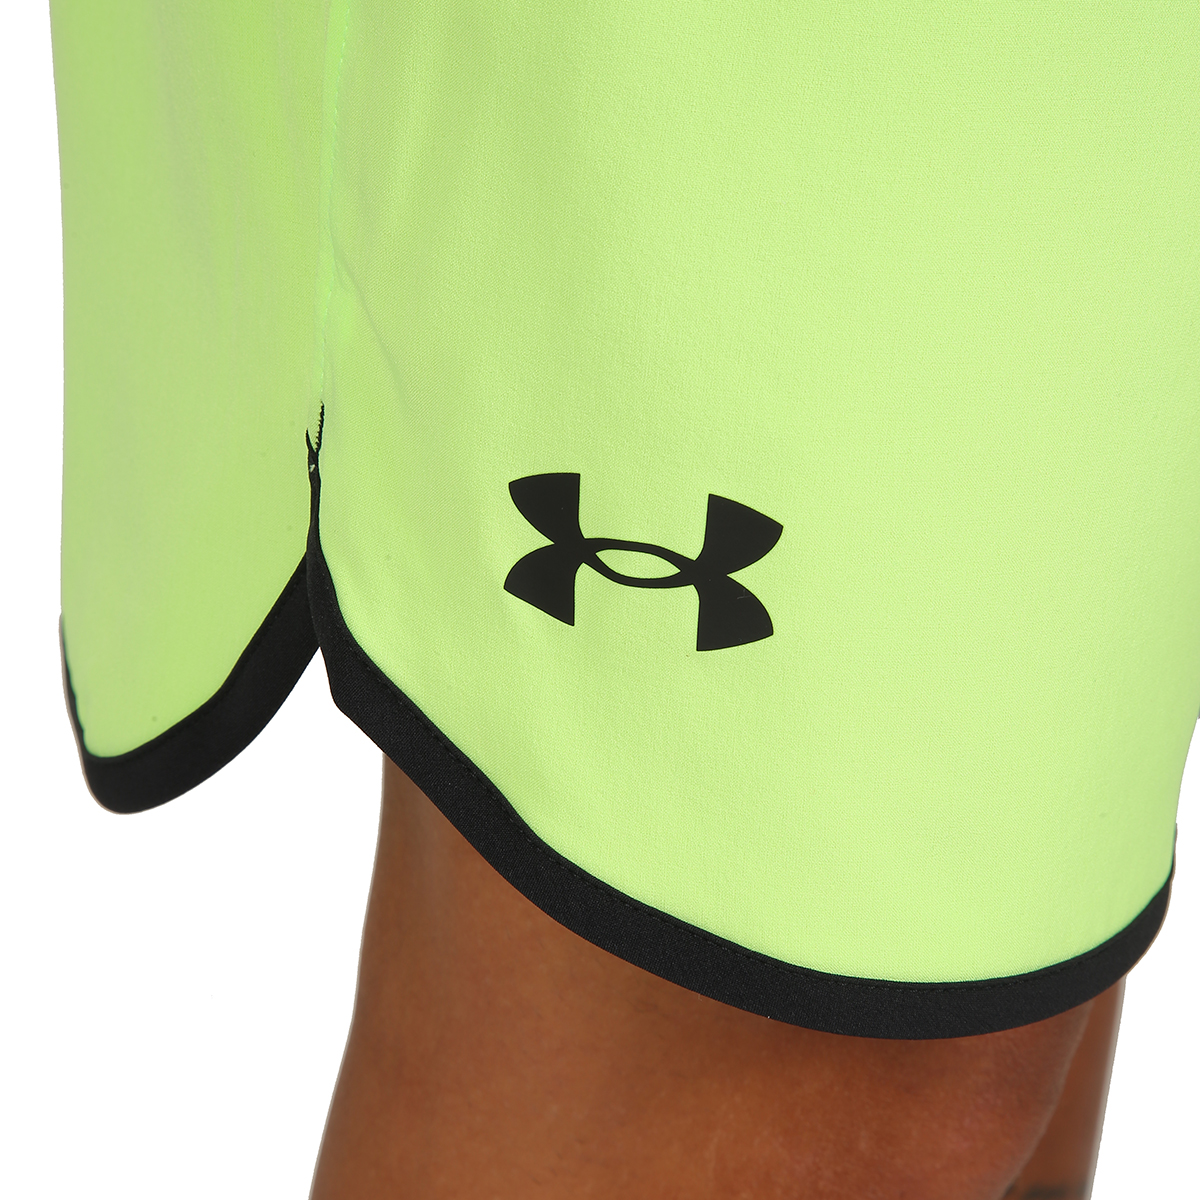 Short Under Armour Hiit,  image number null